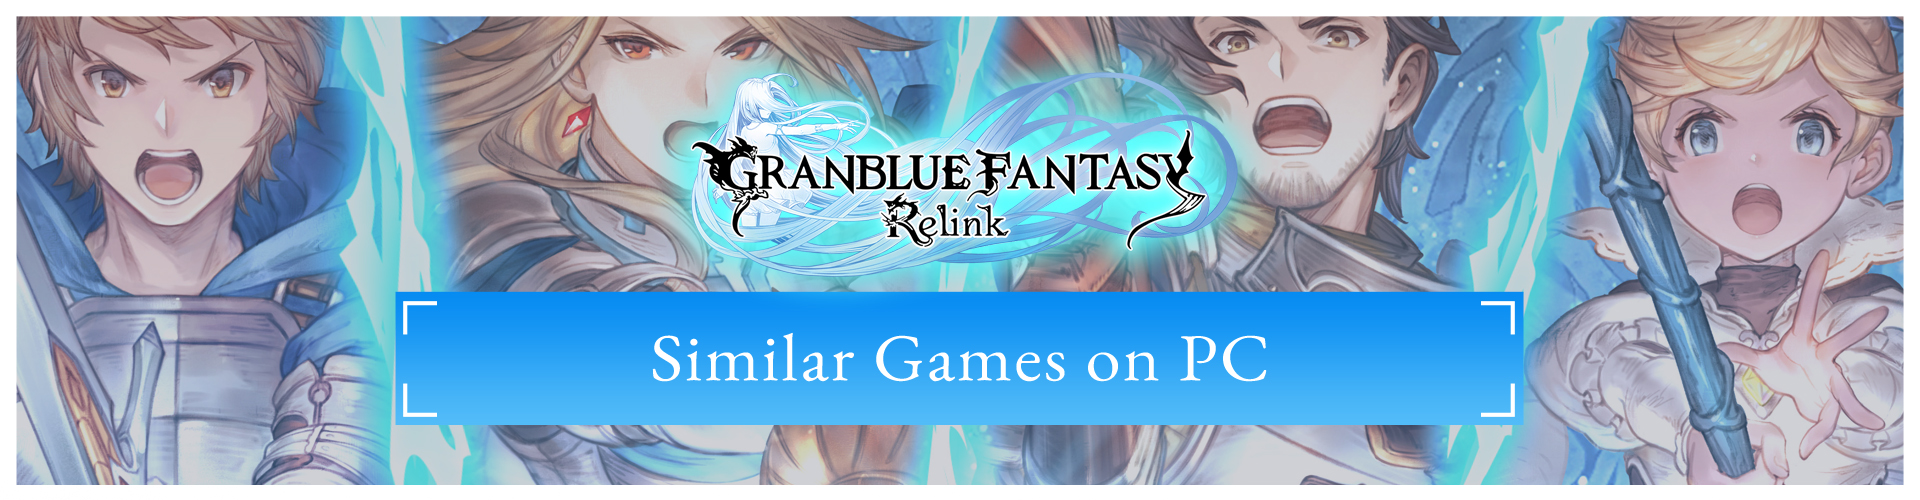 Top 10 PC Games Like Granblue Fantasy Relink